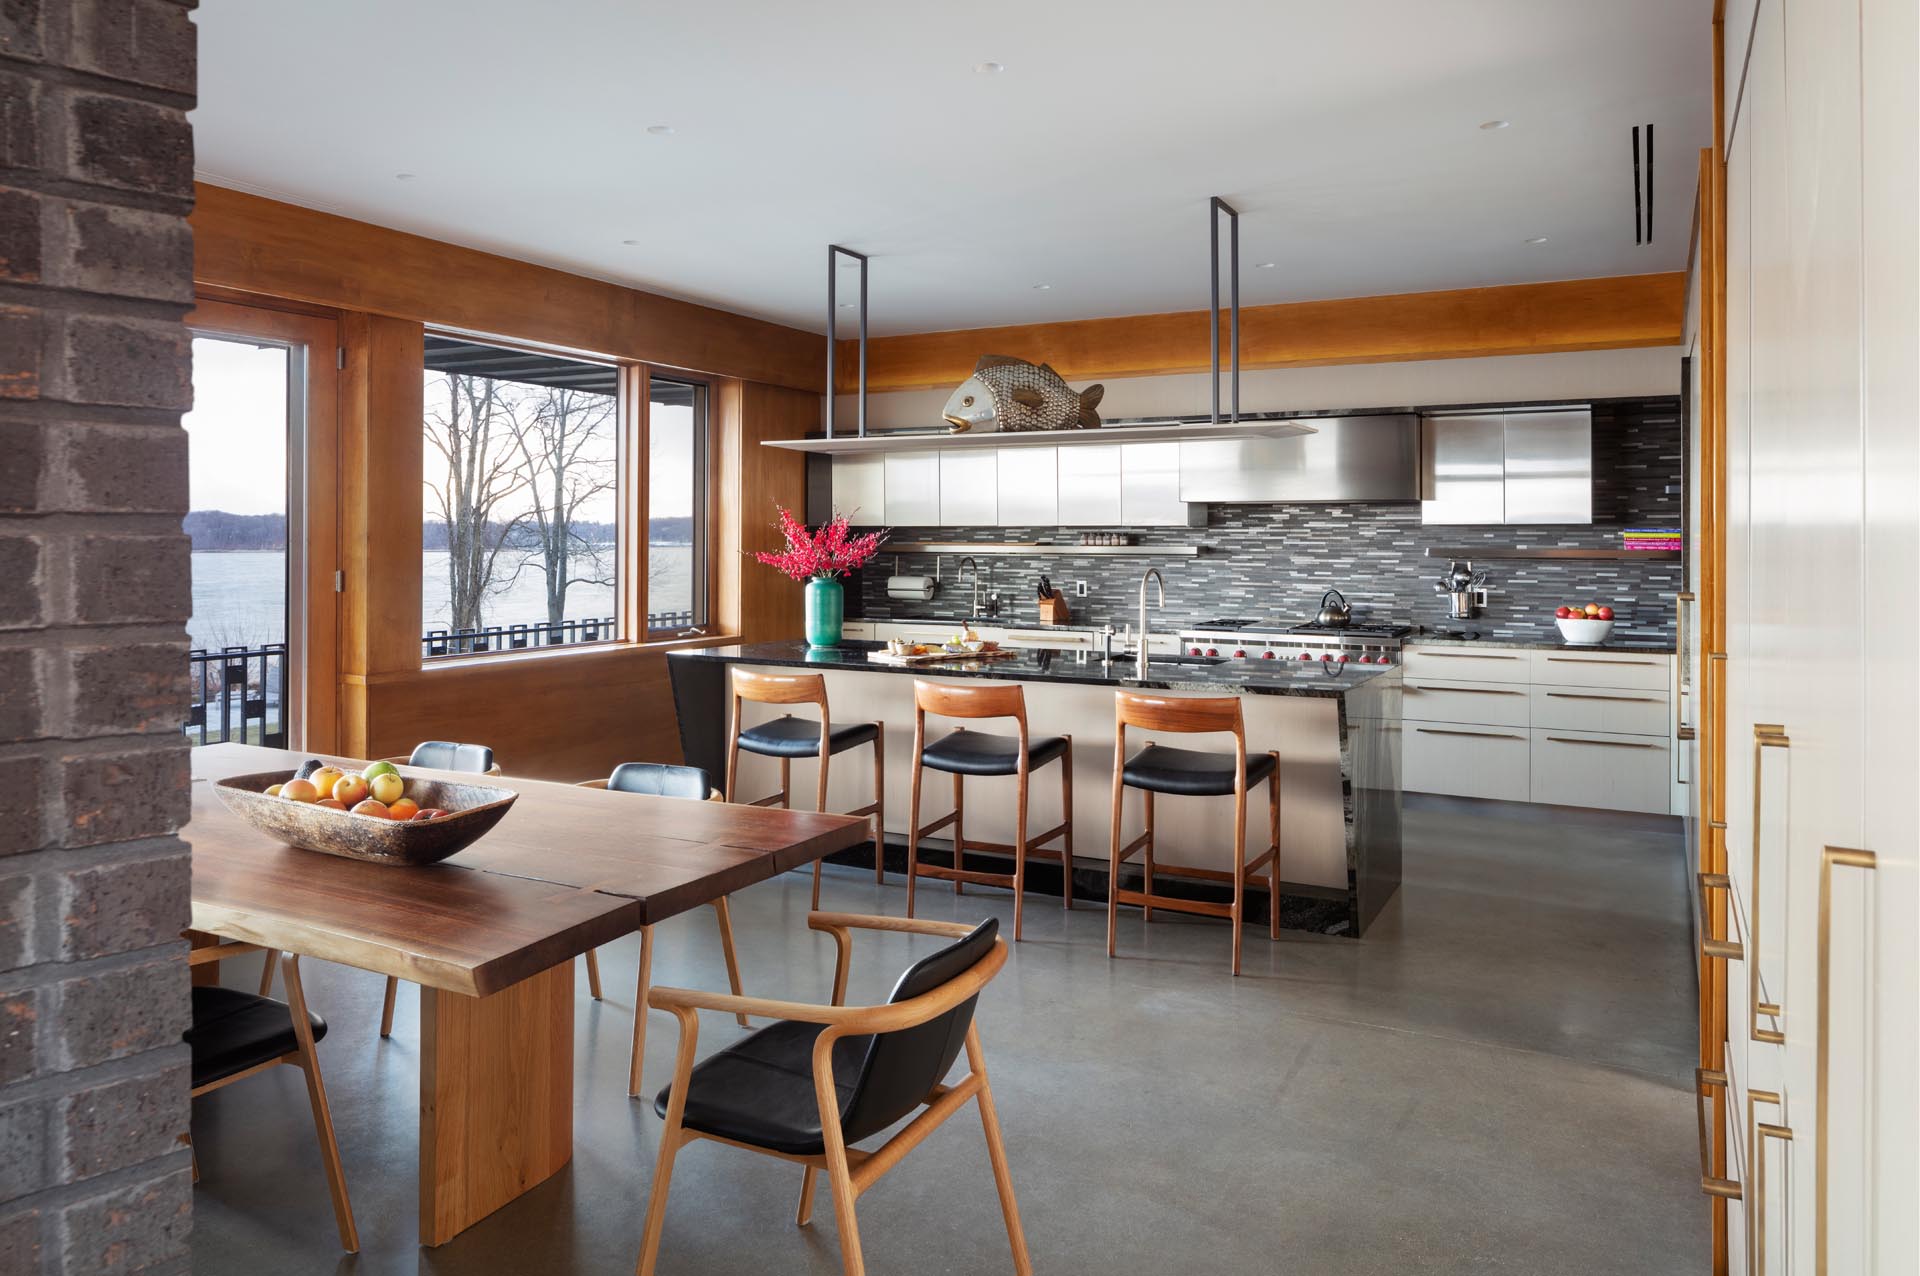 A modern kitchen with stainless steel cabinets, an island, and a dining area.